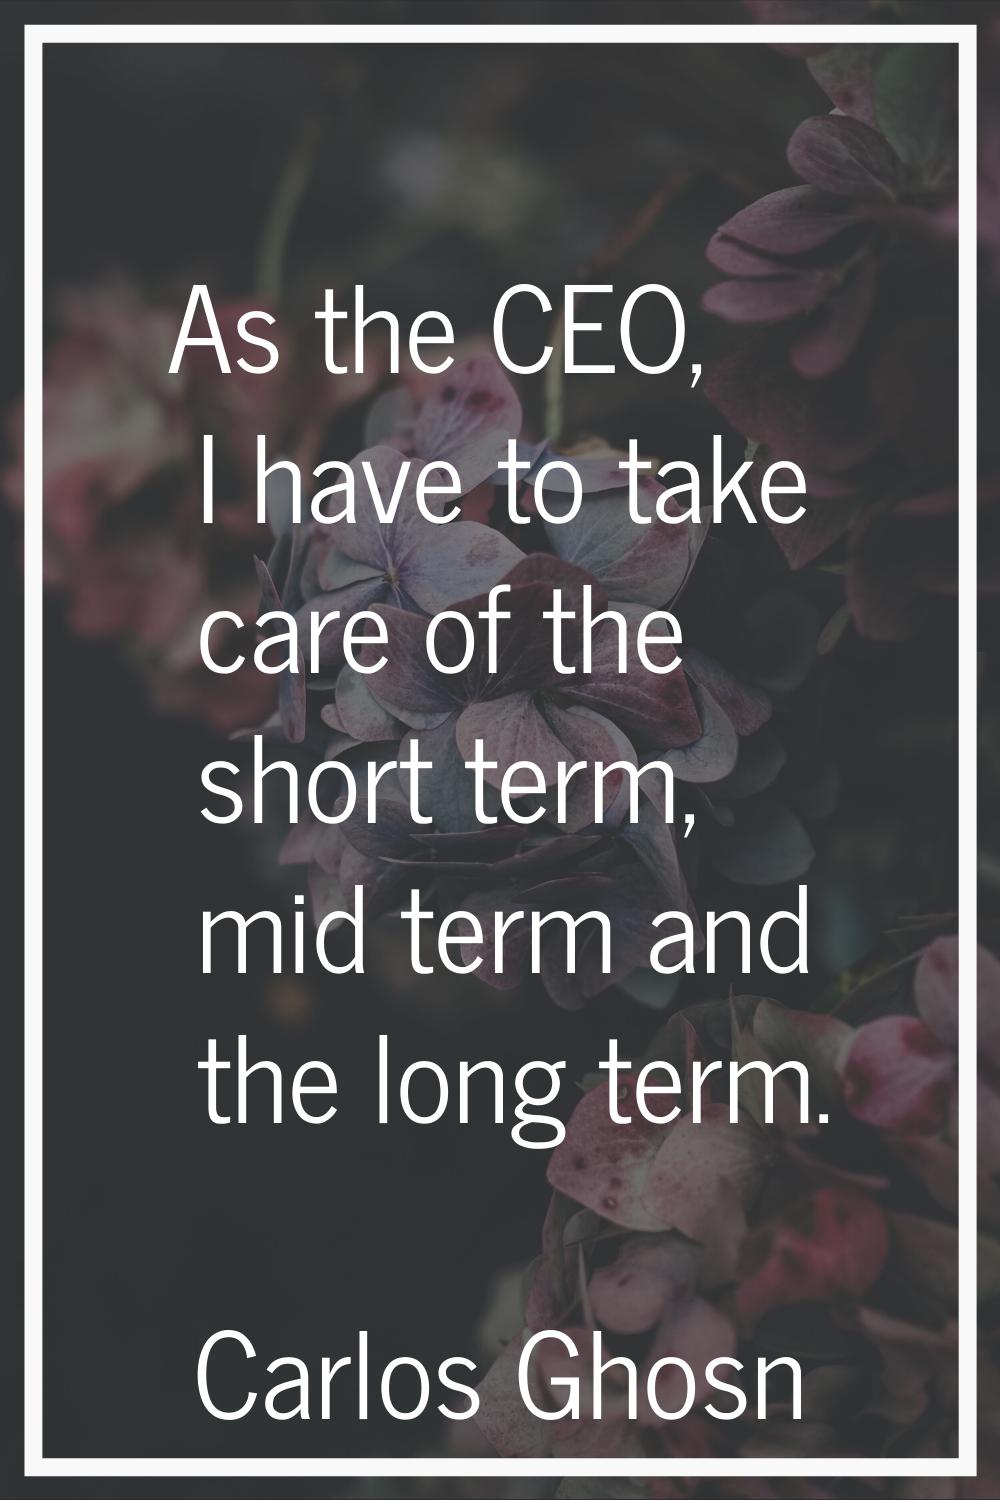 As the CEO, I have to take care of the short term, mid term and the long term.